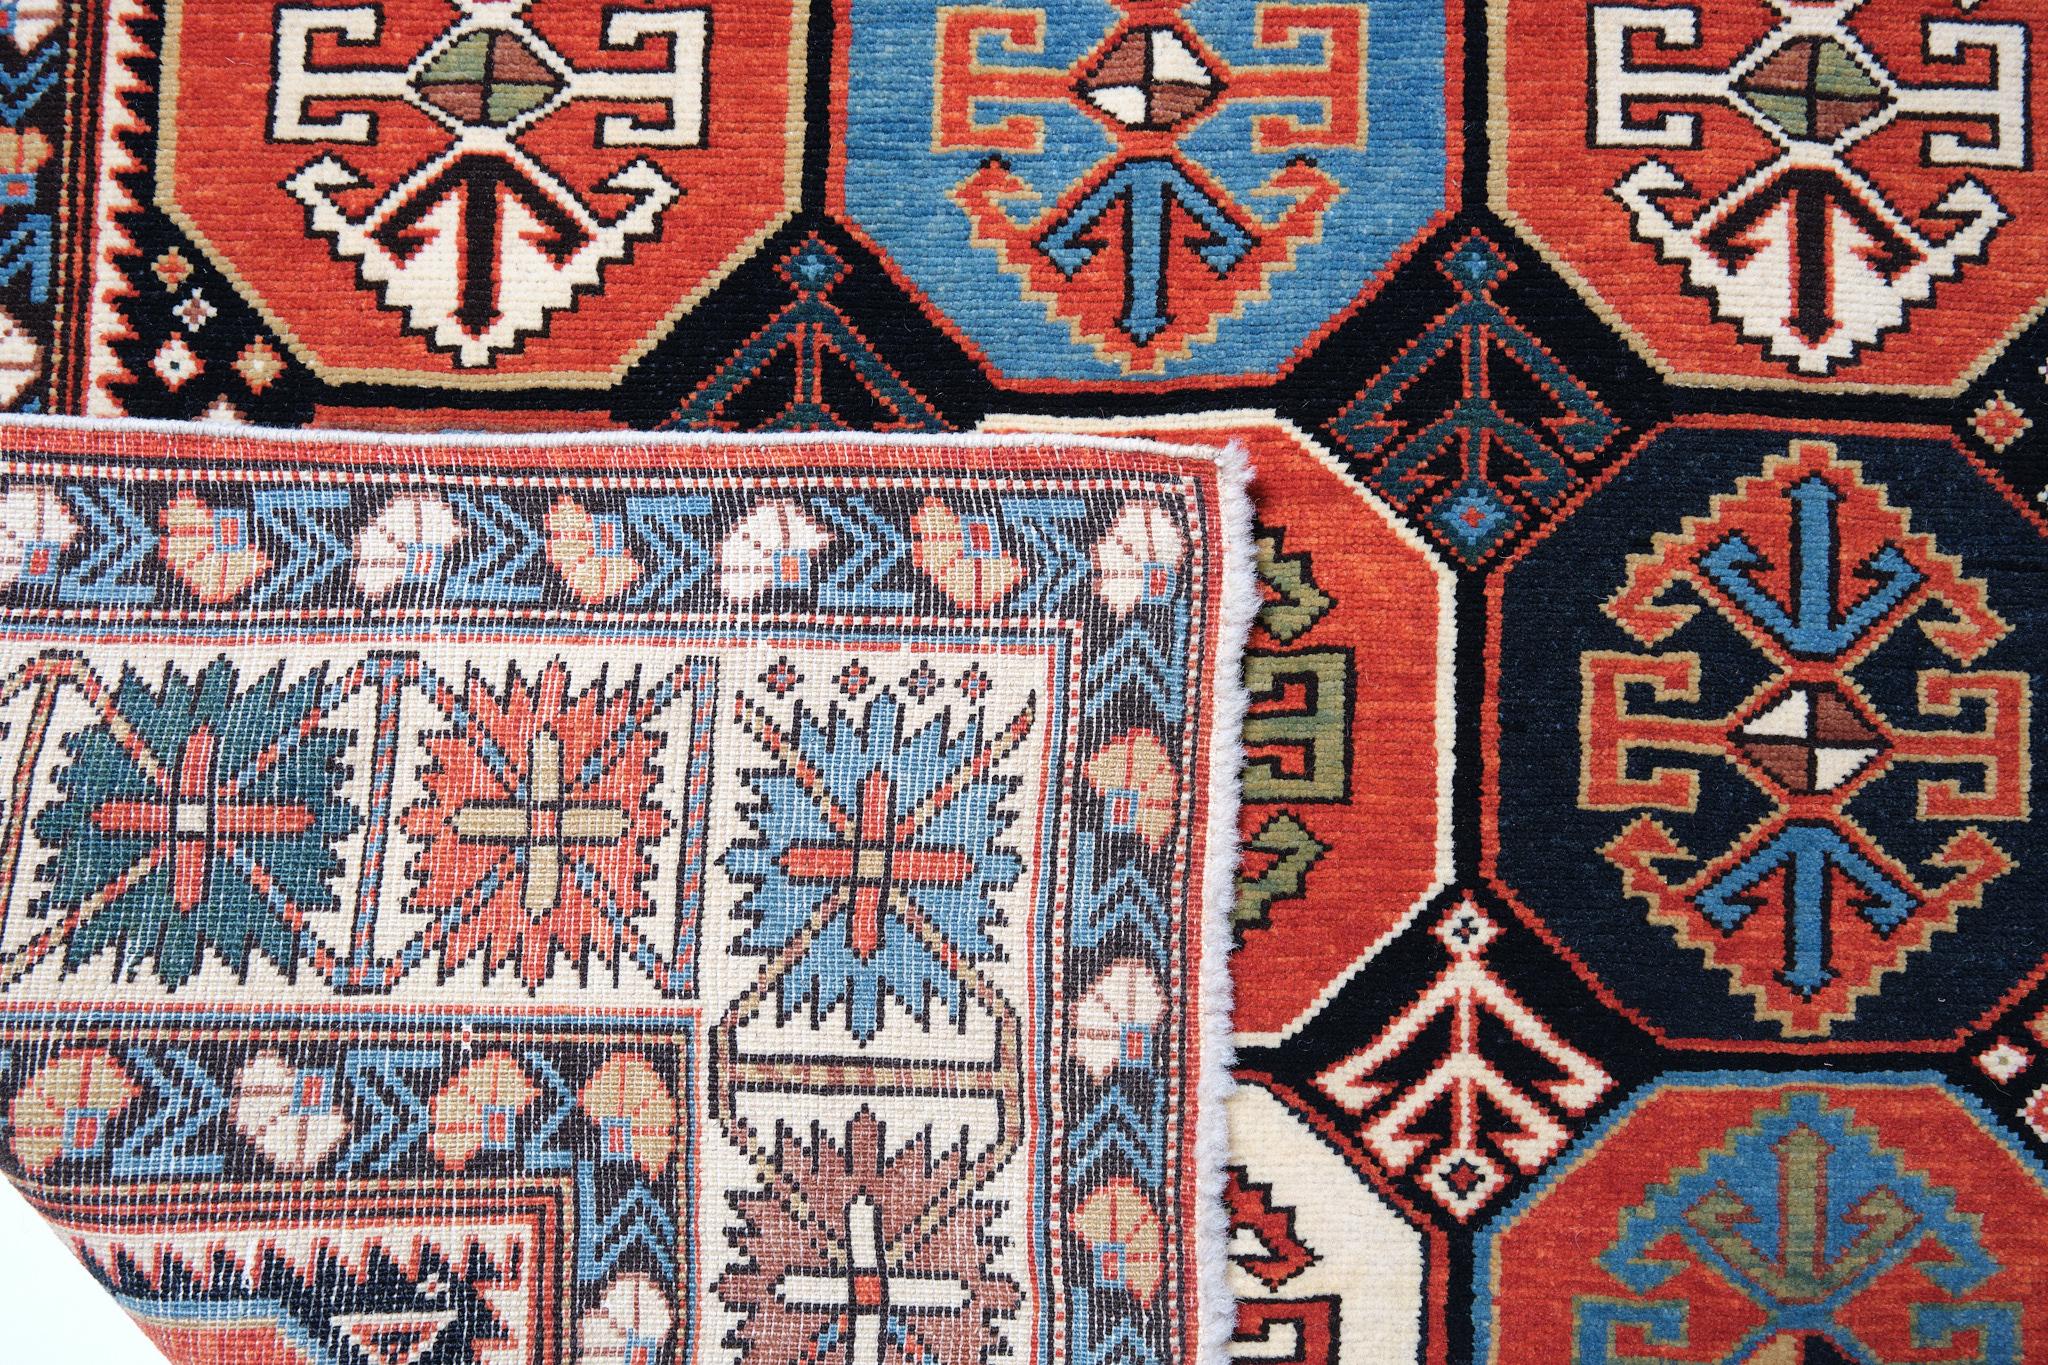 Turkish Ararat Rugs Kuba Rug with Octagons Caucasian 19th C. Revival Rug, Natural Dyed For Sale